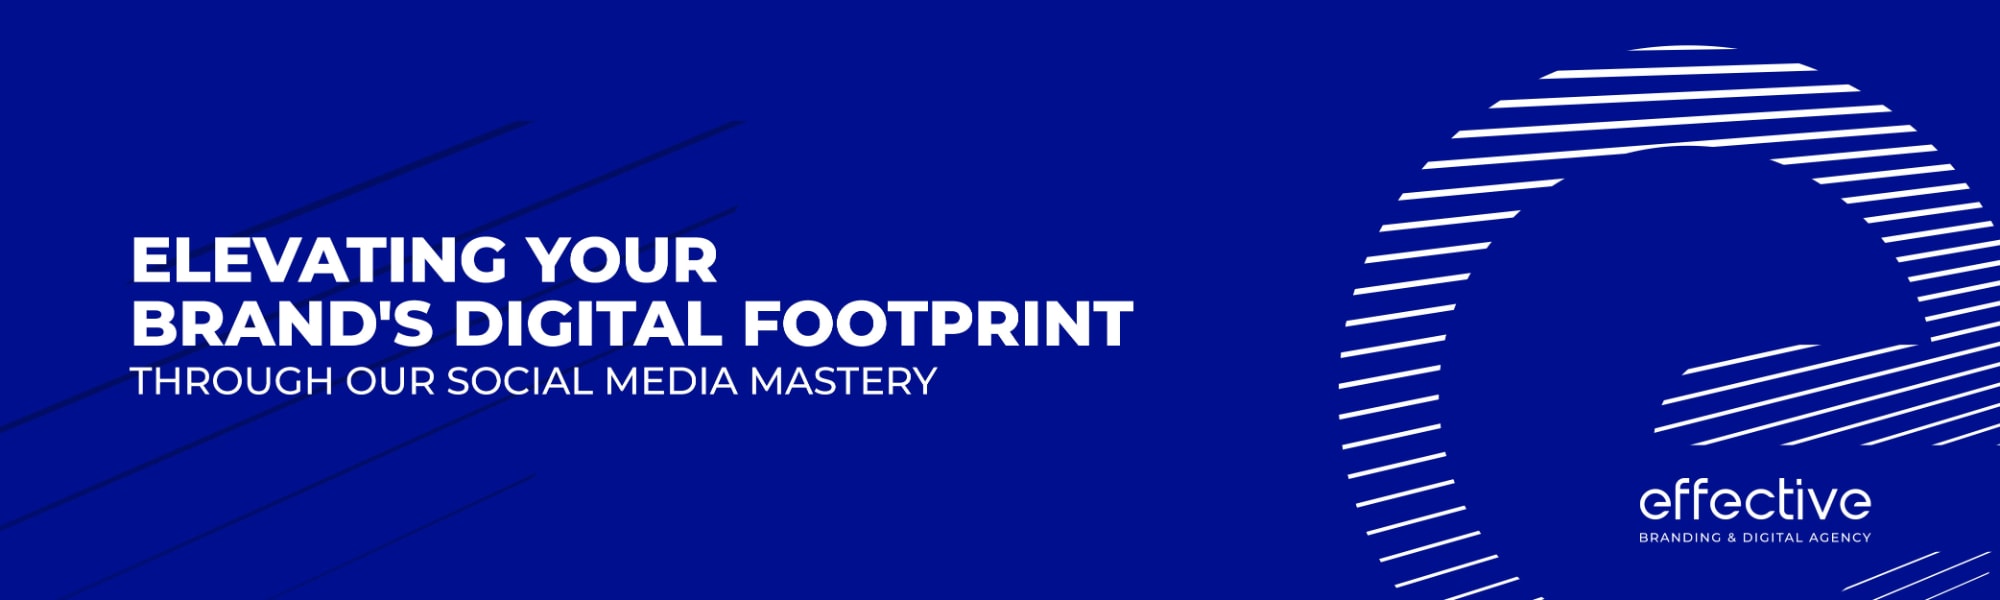 Elevating Your Brand Digital Footprint Through Our Social Media Mastery